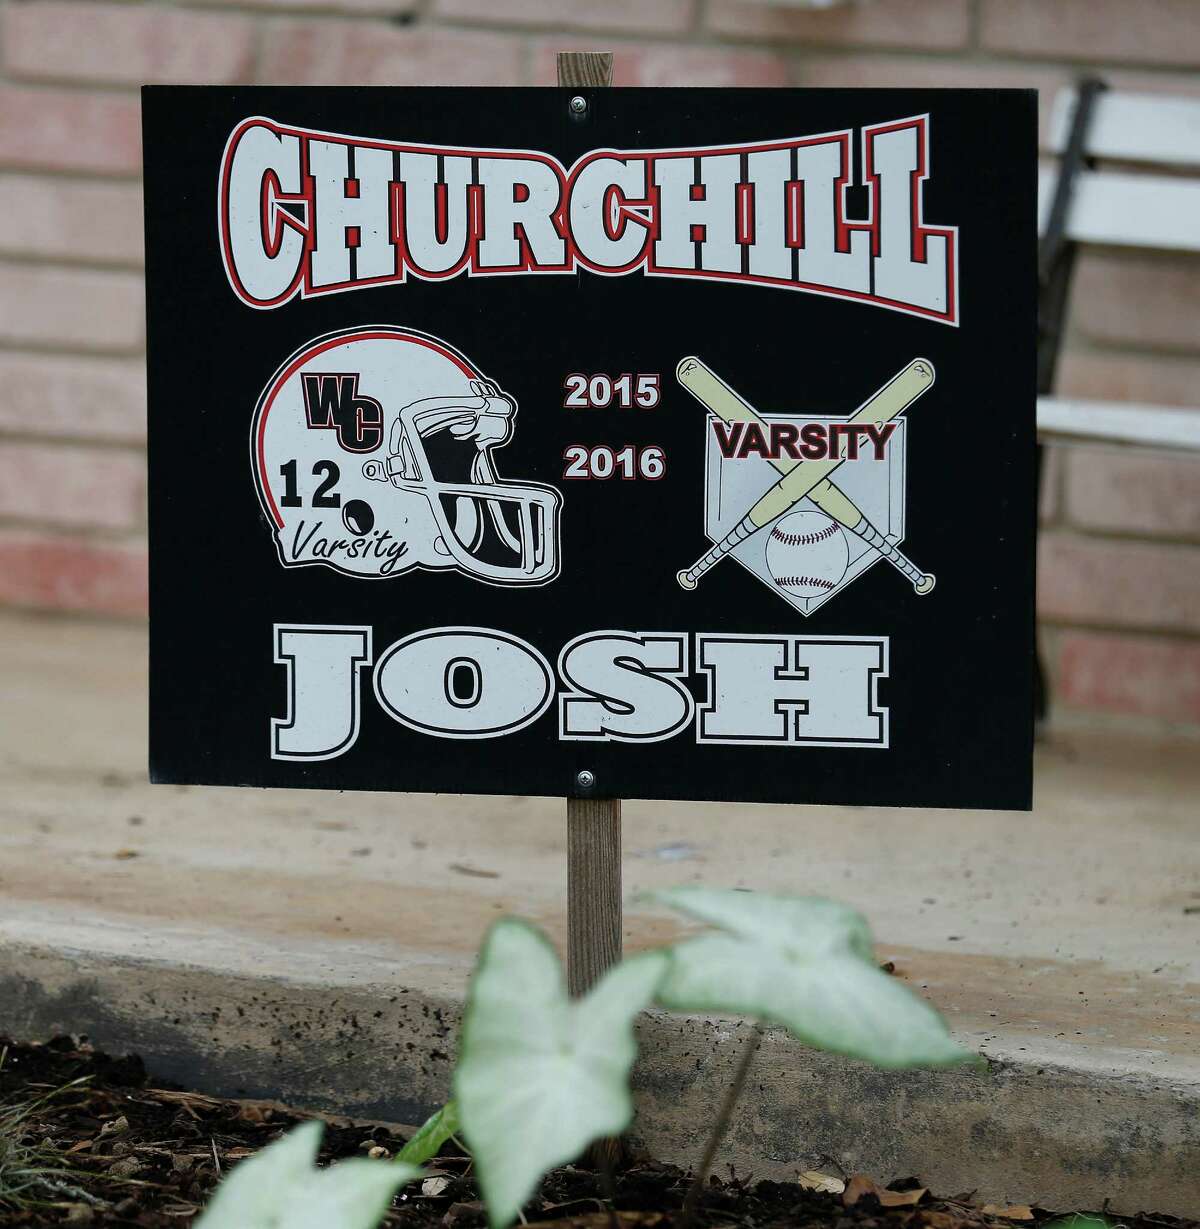 In August, Stacie Pollard and her husband Dan lost their youngest son, Joshua, when he passed away due to sudden cardiac arrest from a previously undiagnosed heart condition. In front of the family's home is a sign showing the sports that the 18-year-old participated in at Churchill High School. (Kin Man Hui/San Antonio Express-News)